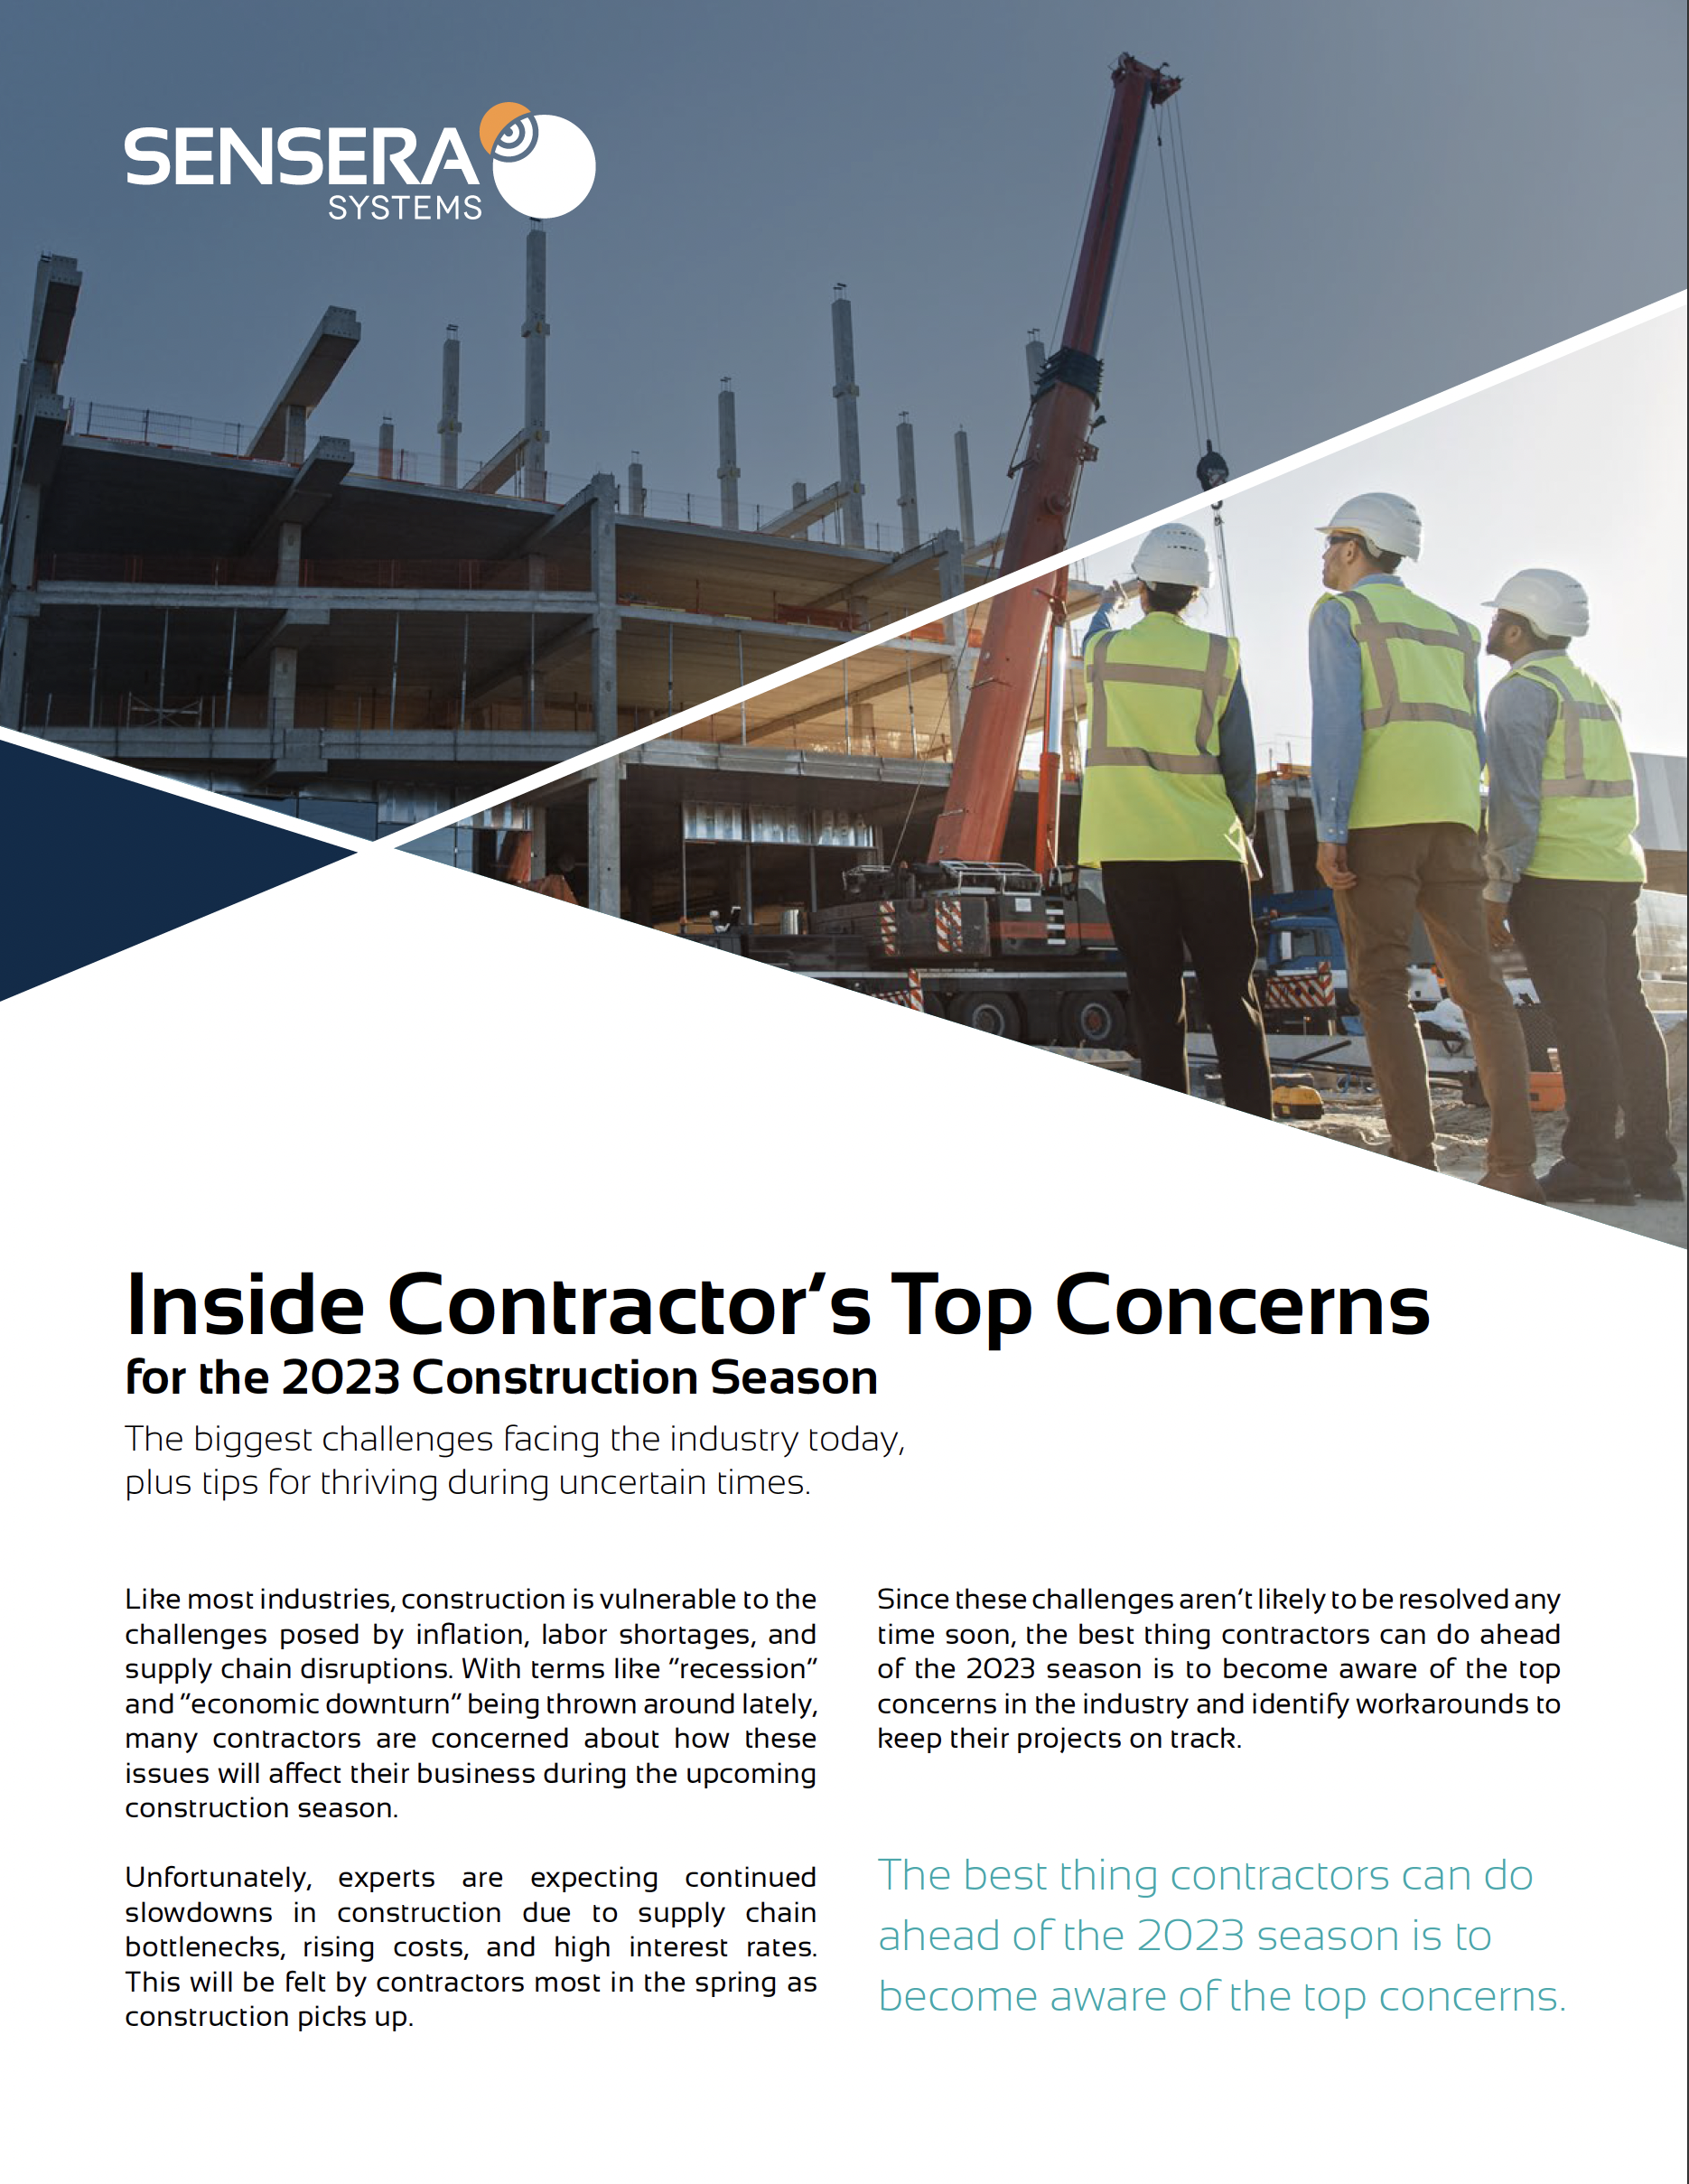 Inside Contractor's Top Concerns for the 2023 Construction Season